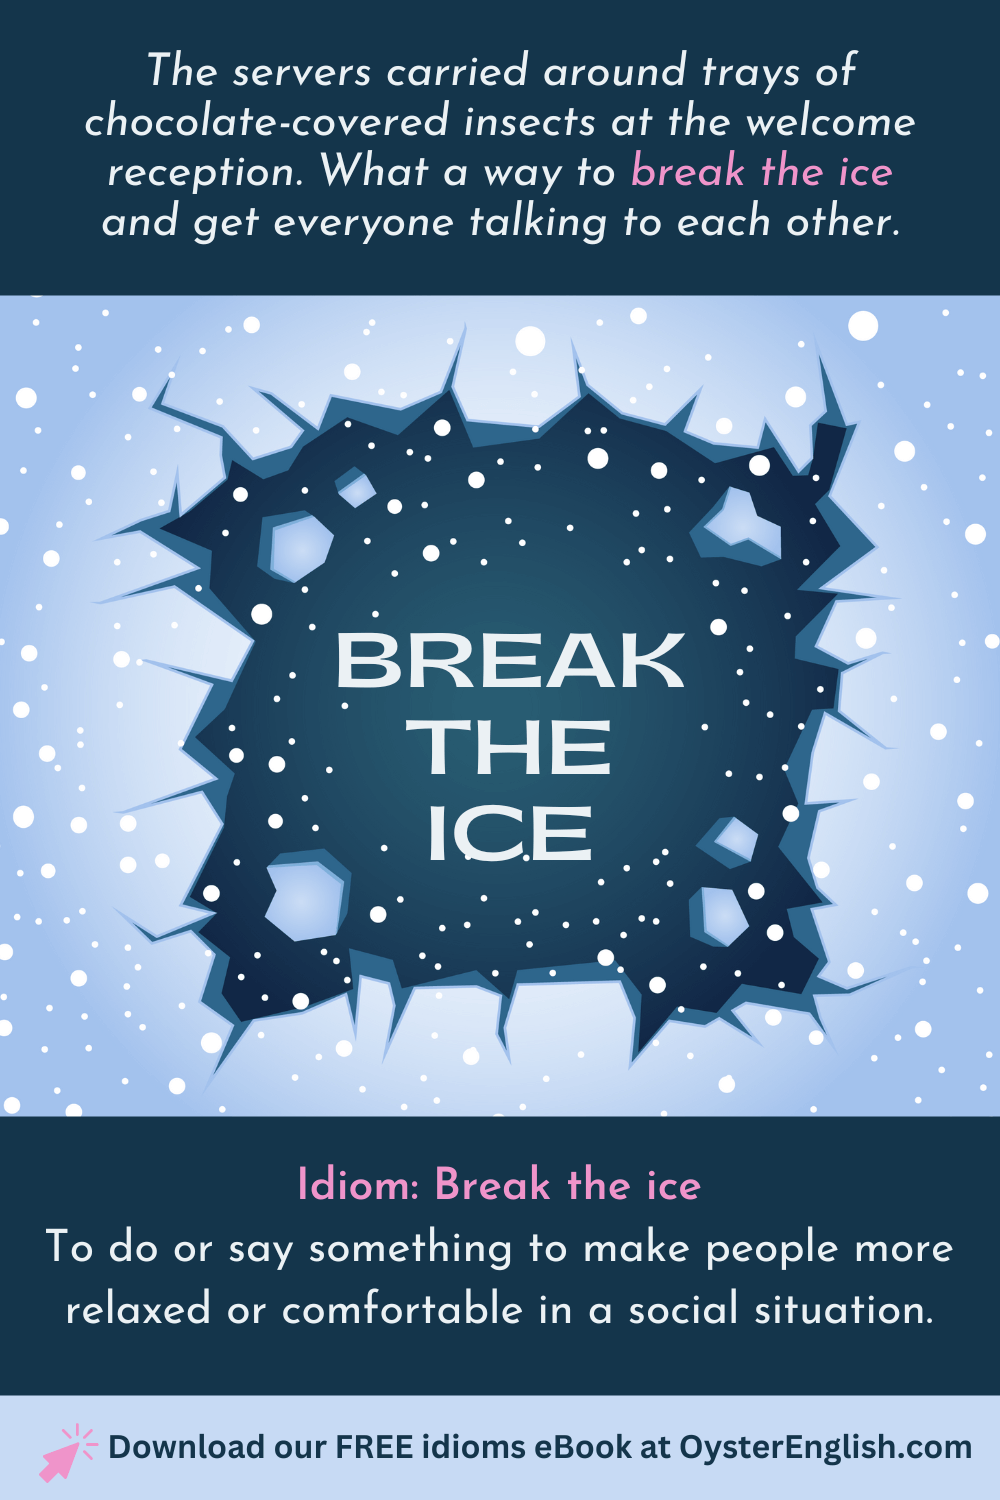 https://www.oysterenglish.com/images/idiom-break-the-ice-OysterEnglish.com.png